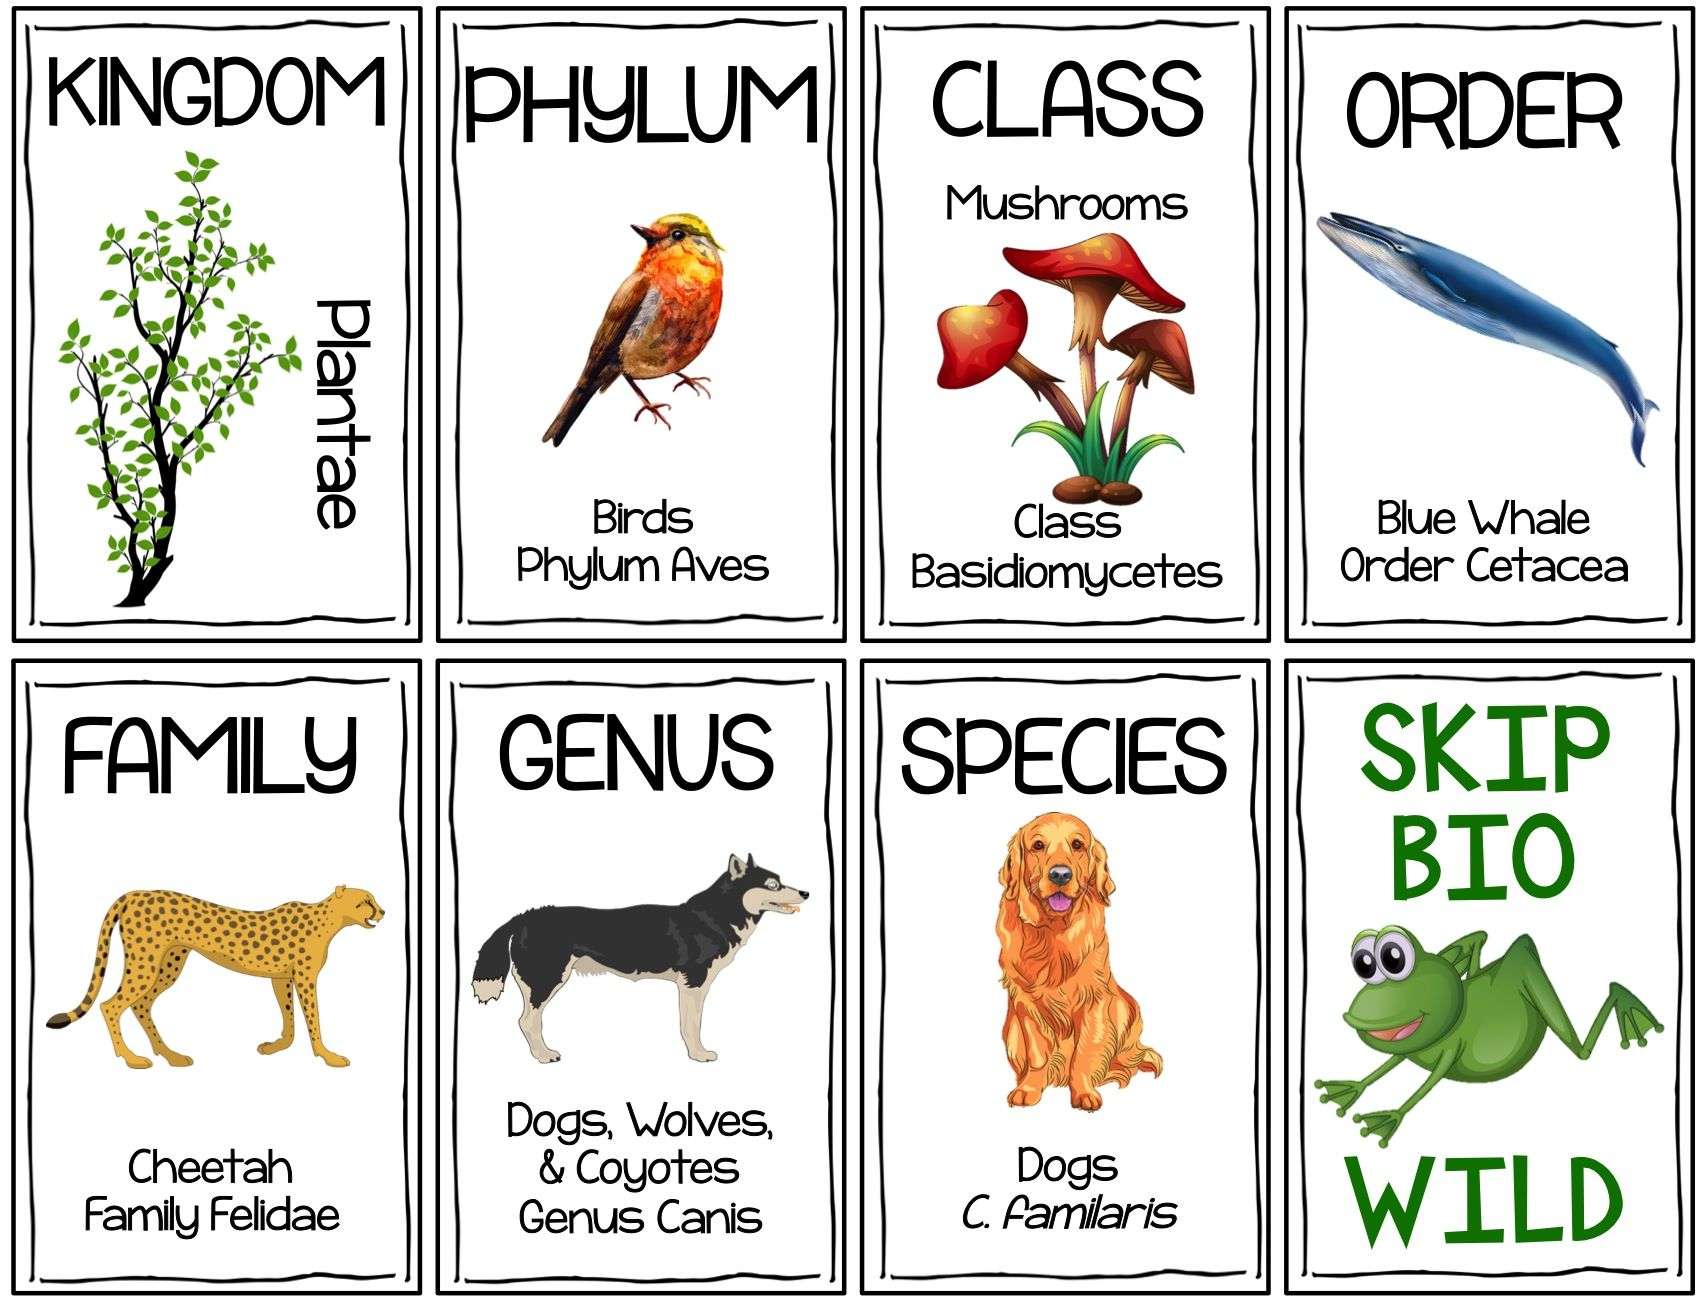 From Domain to Species, this cooperative learning card game will ...